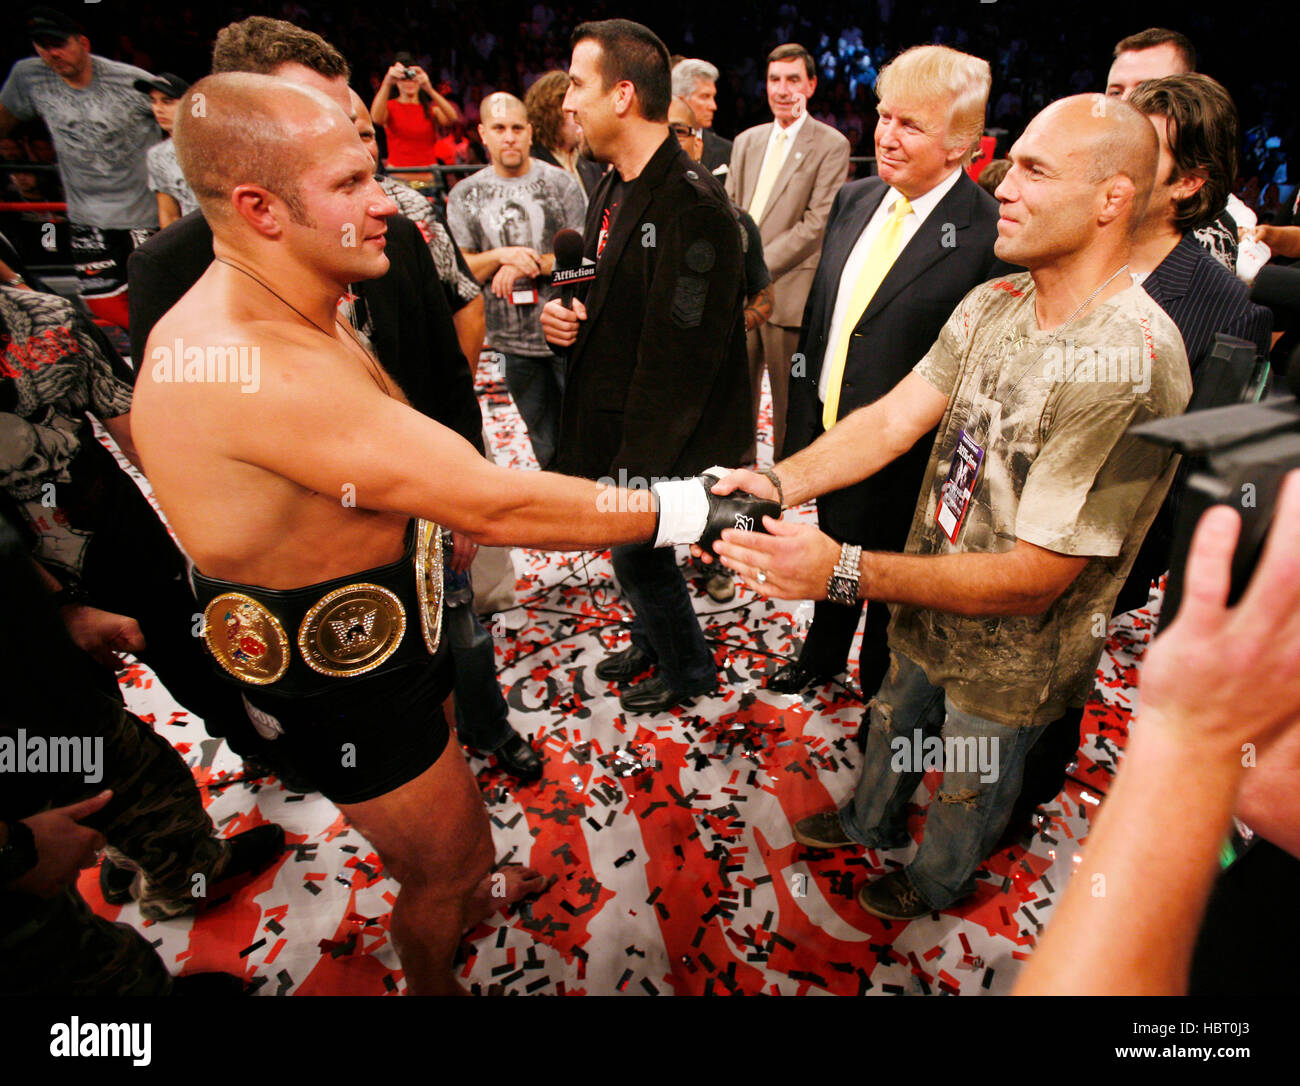 Fedor Emelianenko, left,  greets Randy Couture in the ring after defeating Tim Sylvia at Affliction's 'Banned', a mixed martial arts fight at the Honda Center on July 19, 2008 in Anaheim, California. Donald Trump is show in the yellow tie. Photo by Francis Specker Stock Photo